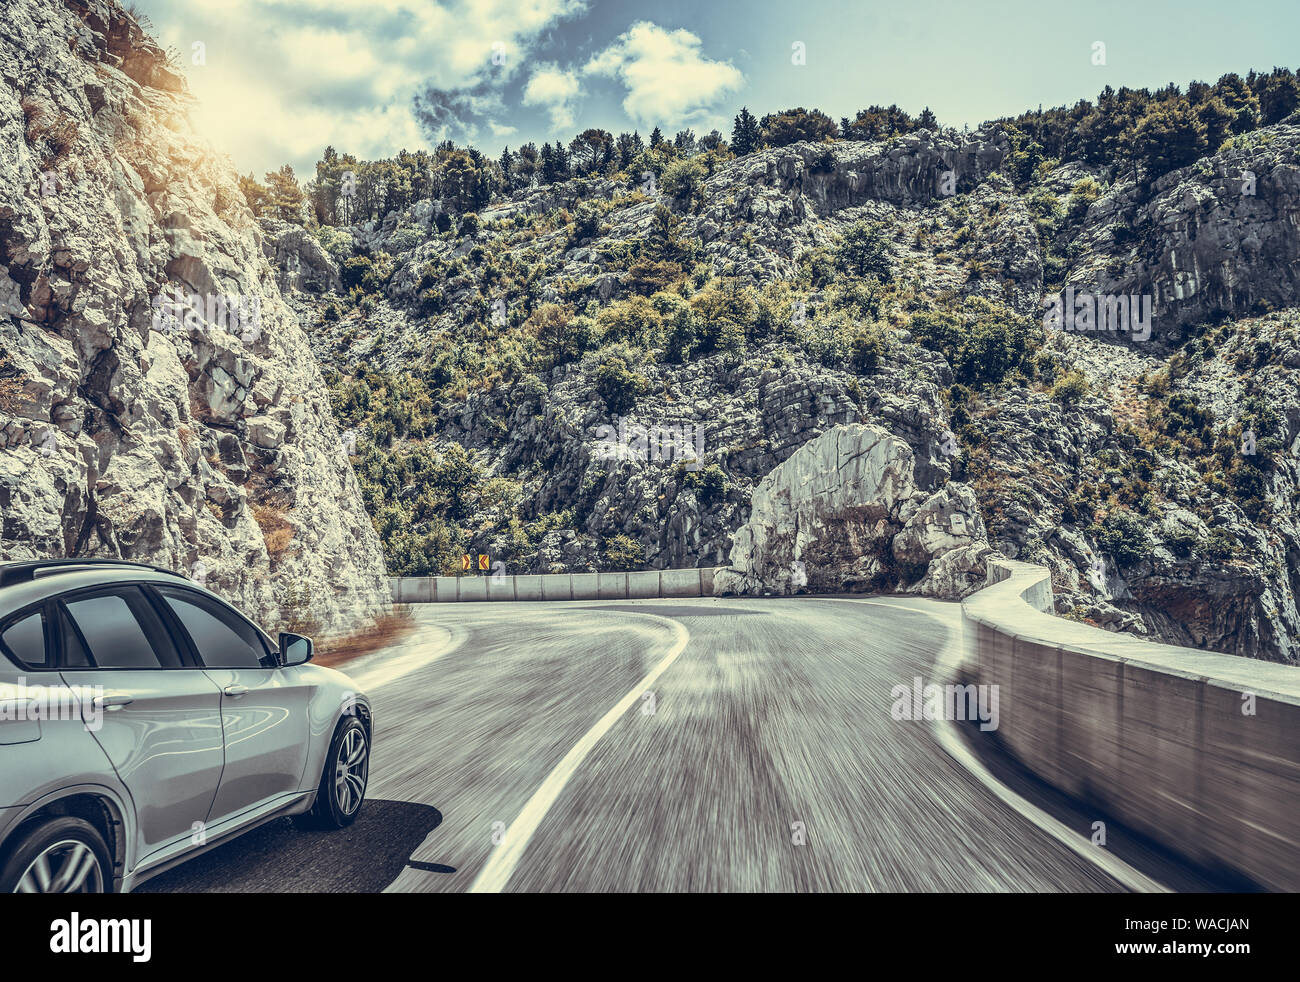 Highway among the mountain scenery. White car on a mountain road. Stock Photo